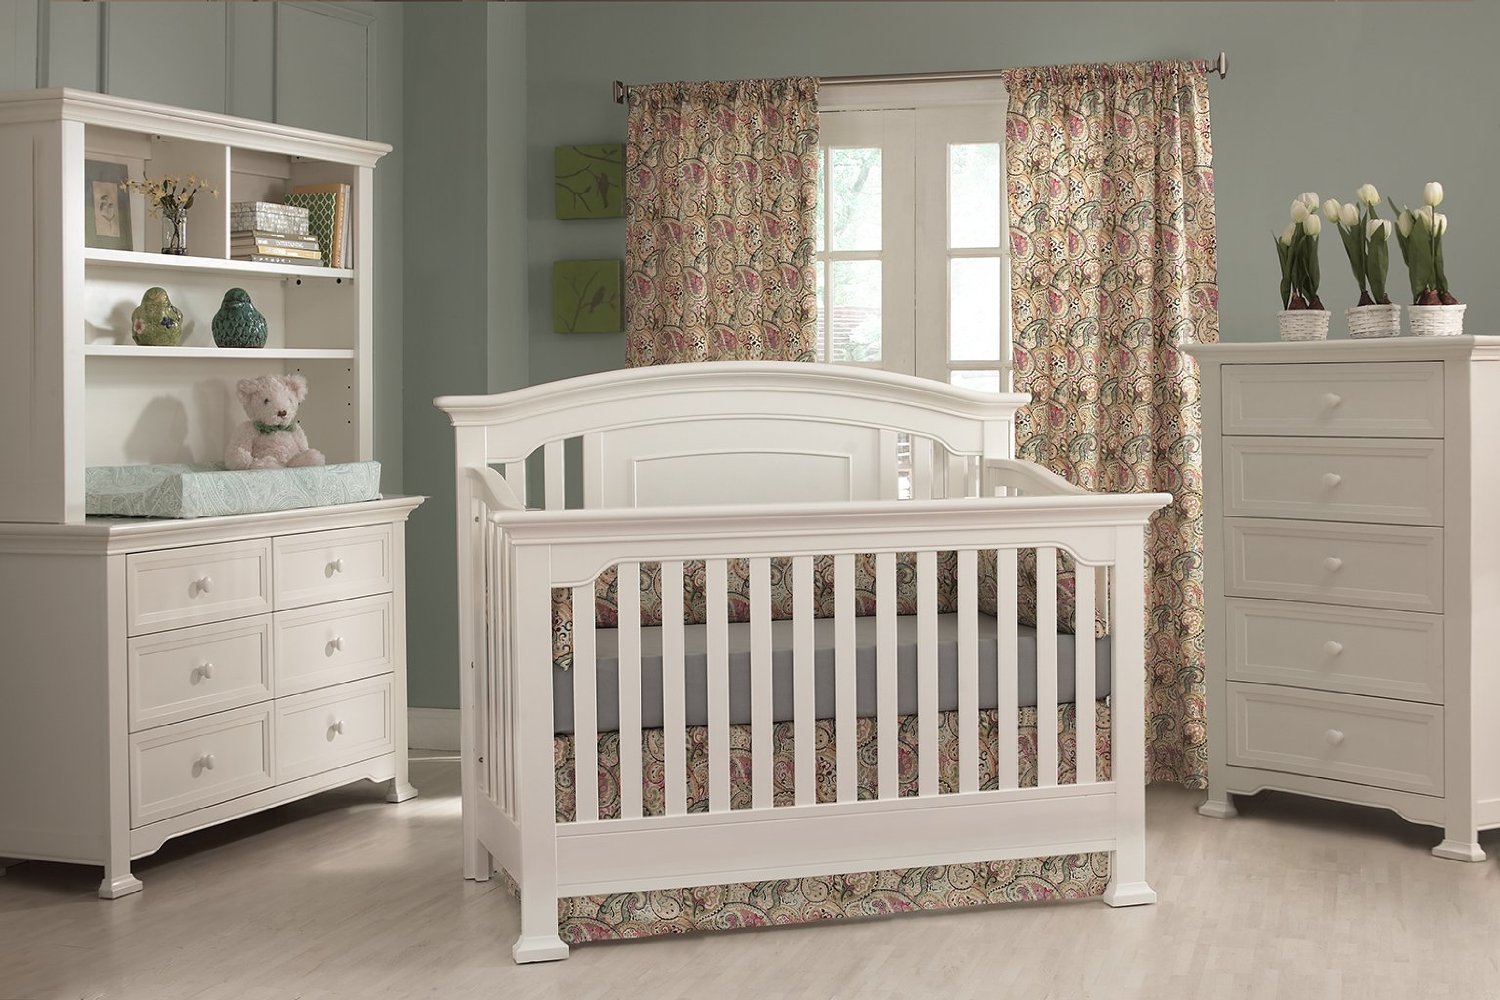 Medford Crib in White from Munire Baby Furniture